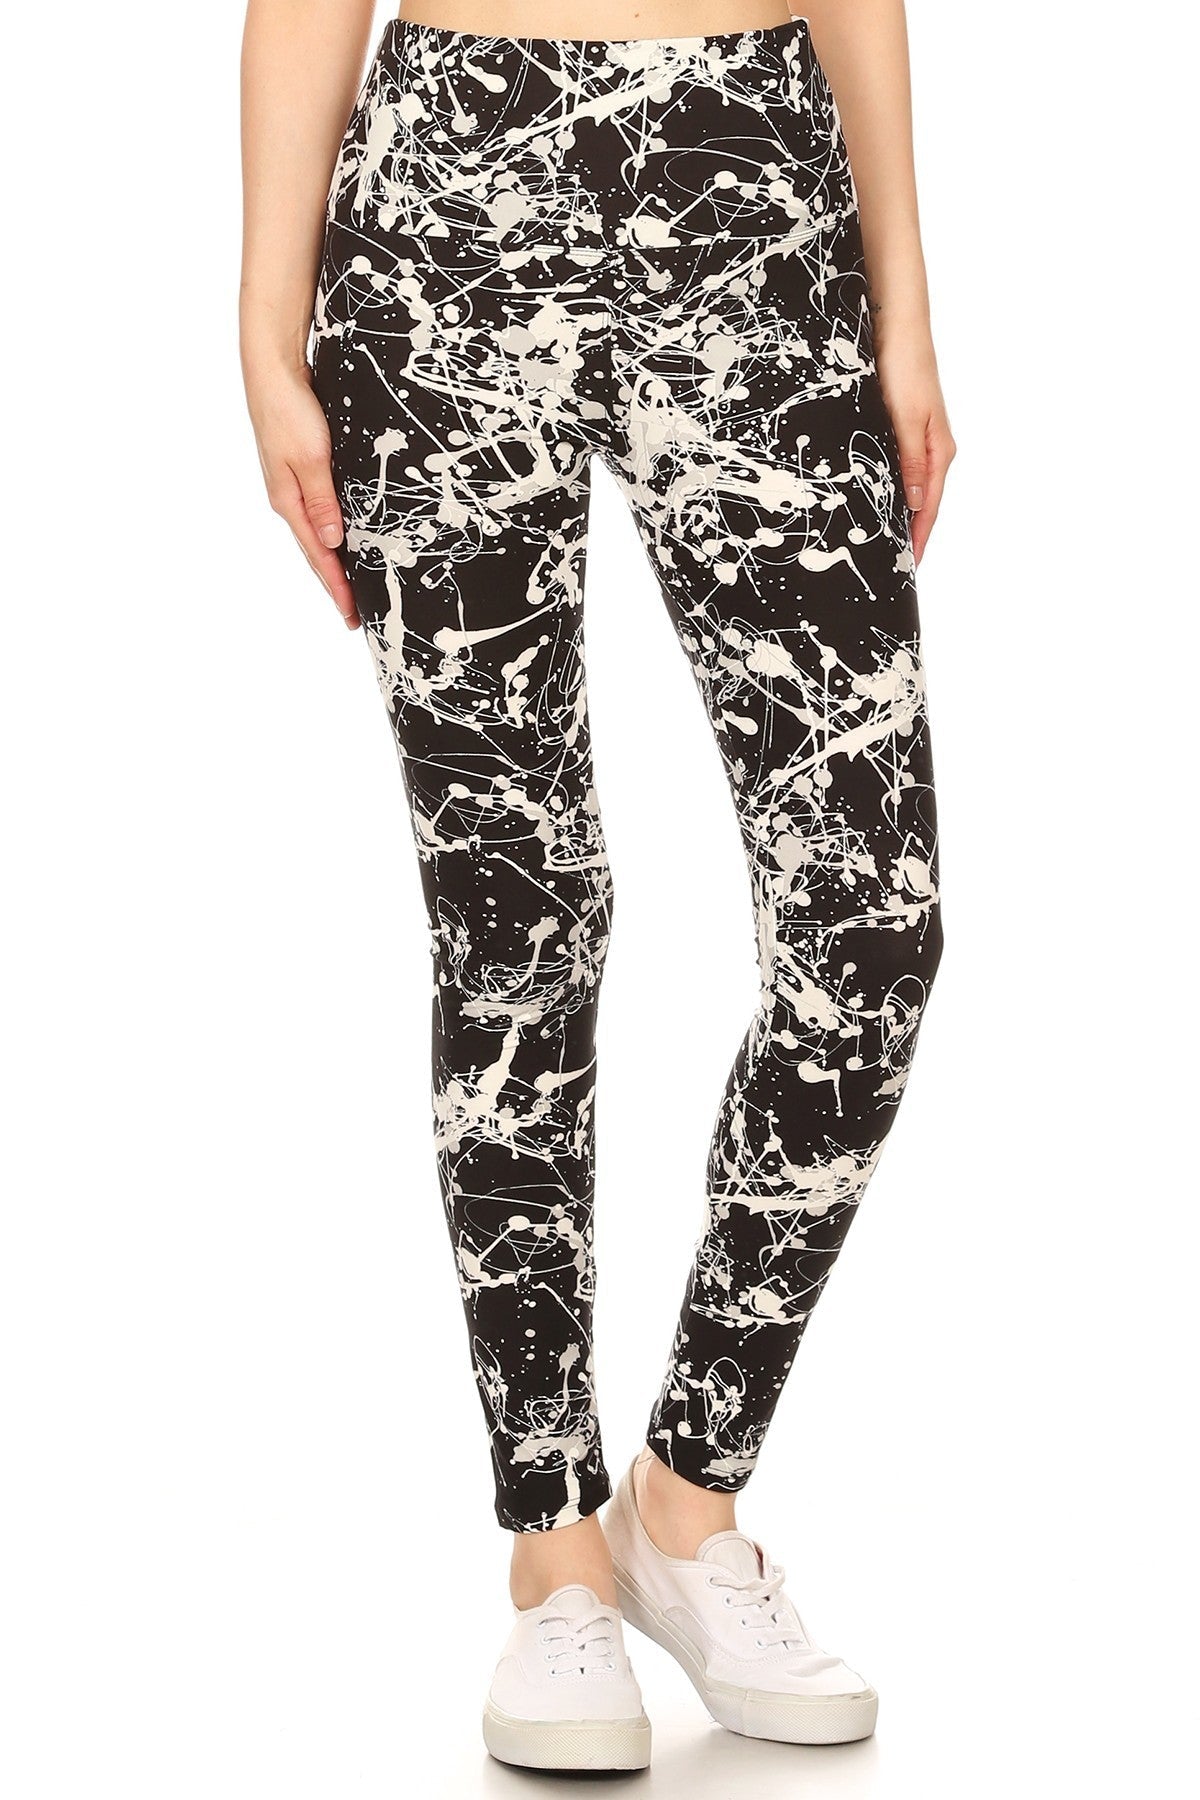 Long Yoga Style Banded Lined Paint Splatters Printed Knit Legging With High Waist Blue Zone Planet